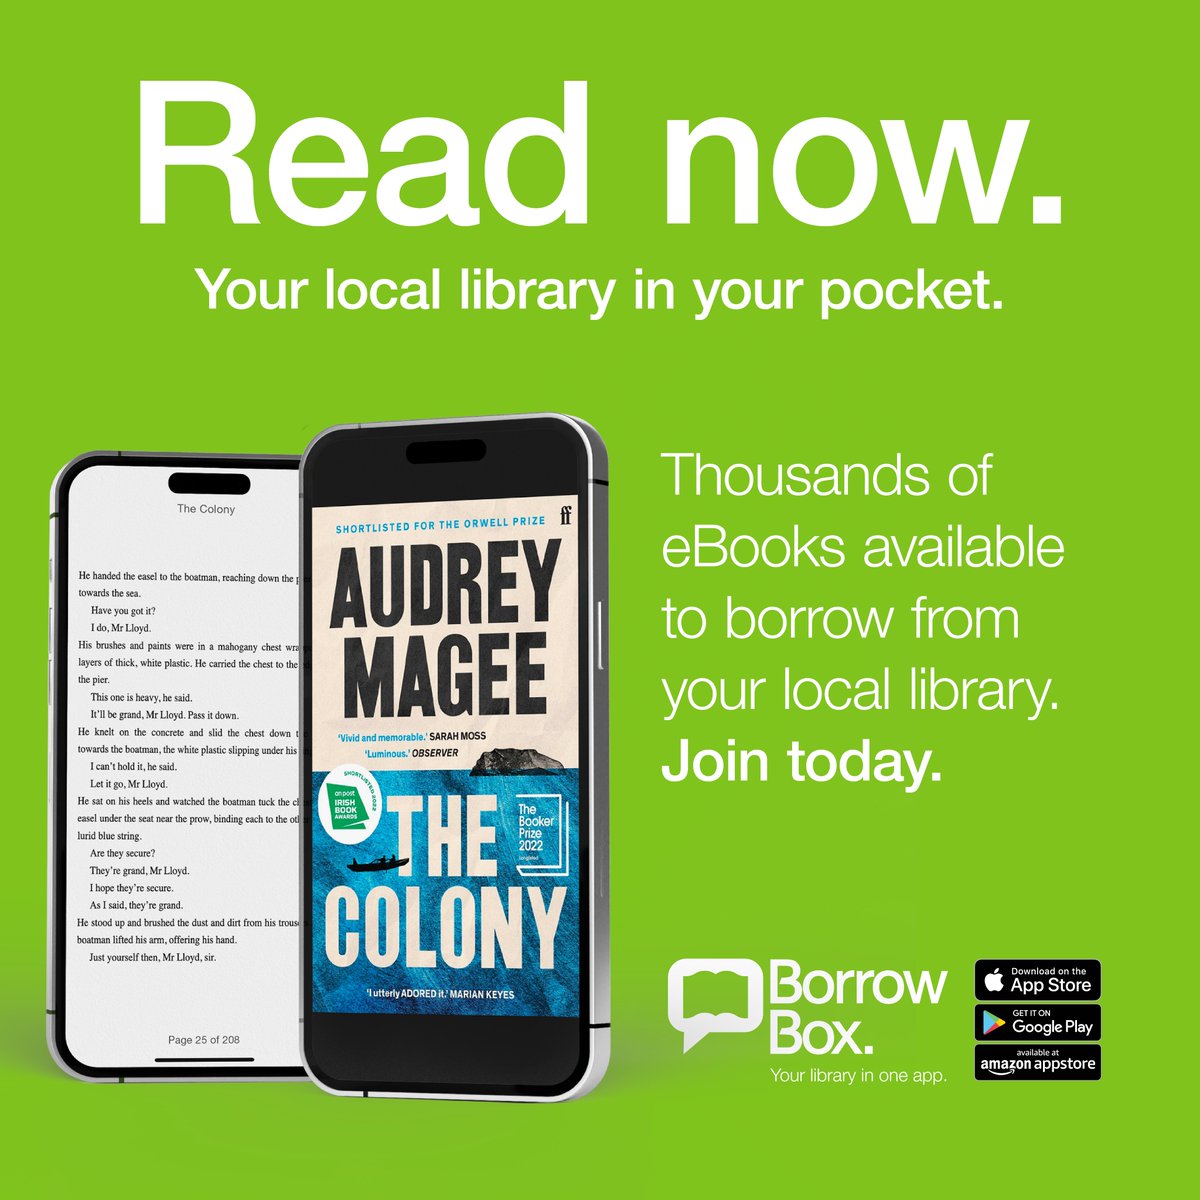 Staff-pick Saturday!📚
Every week we want to bring you a book that one of our staff wants to recommend. This week we have 'The Colony' by Audrey Mcgee.
The eBook and eAudiobook versions are now available on our #Borrowbox app.
#AlwaysOpen #ListenNow #ReadNow